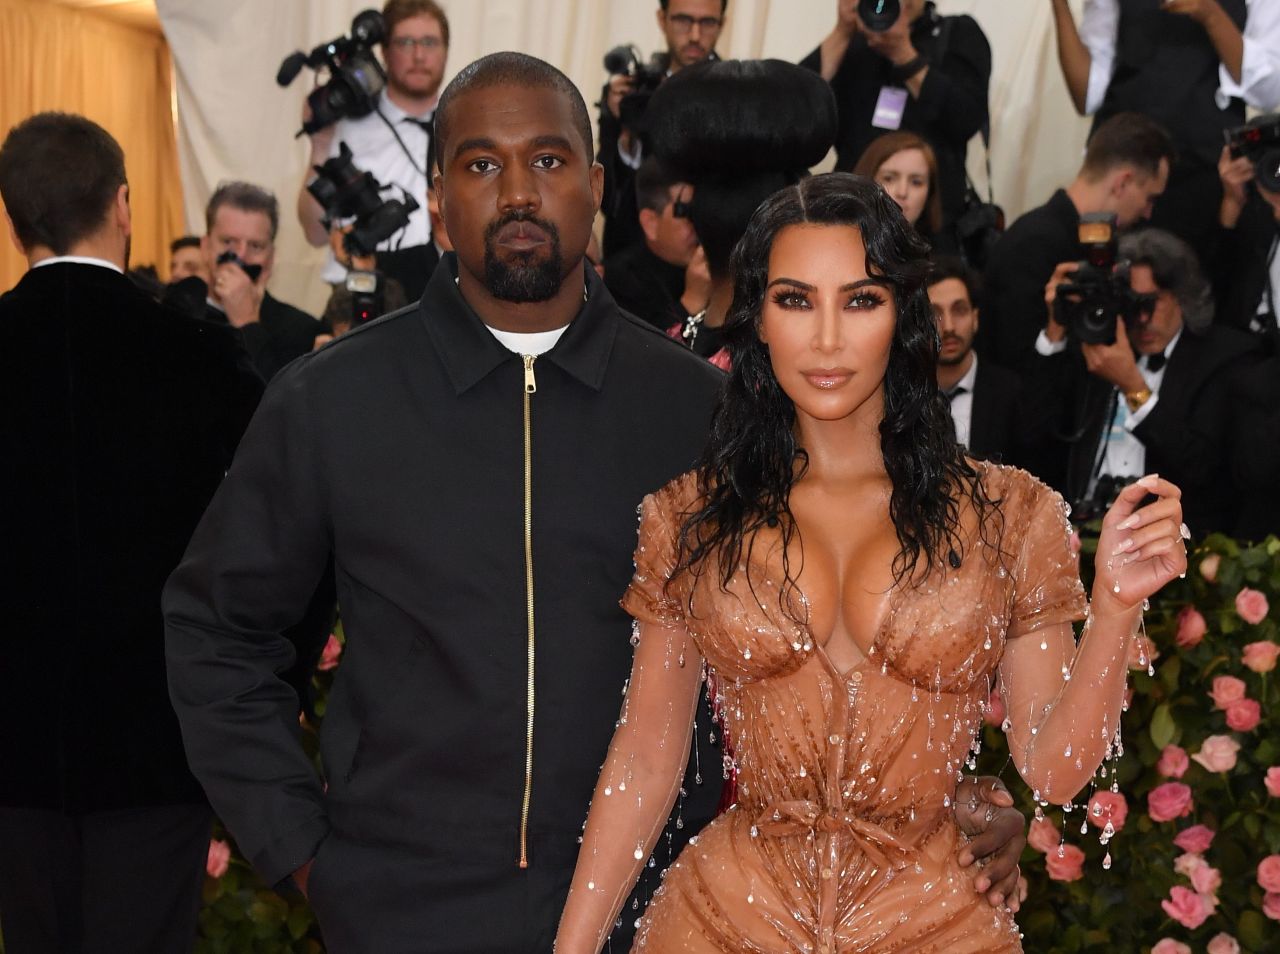 Kardashian West and West together at the 2019 Met Gala.